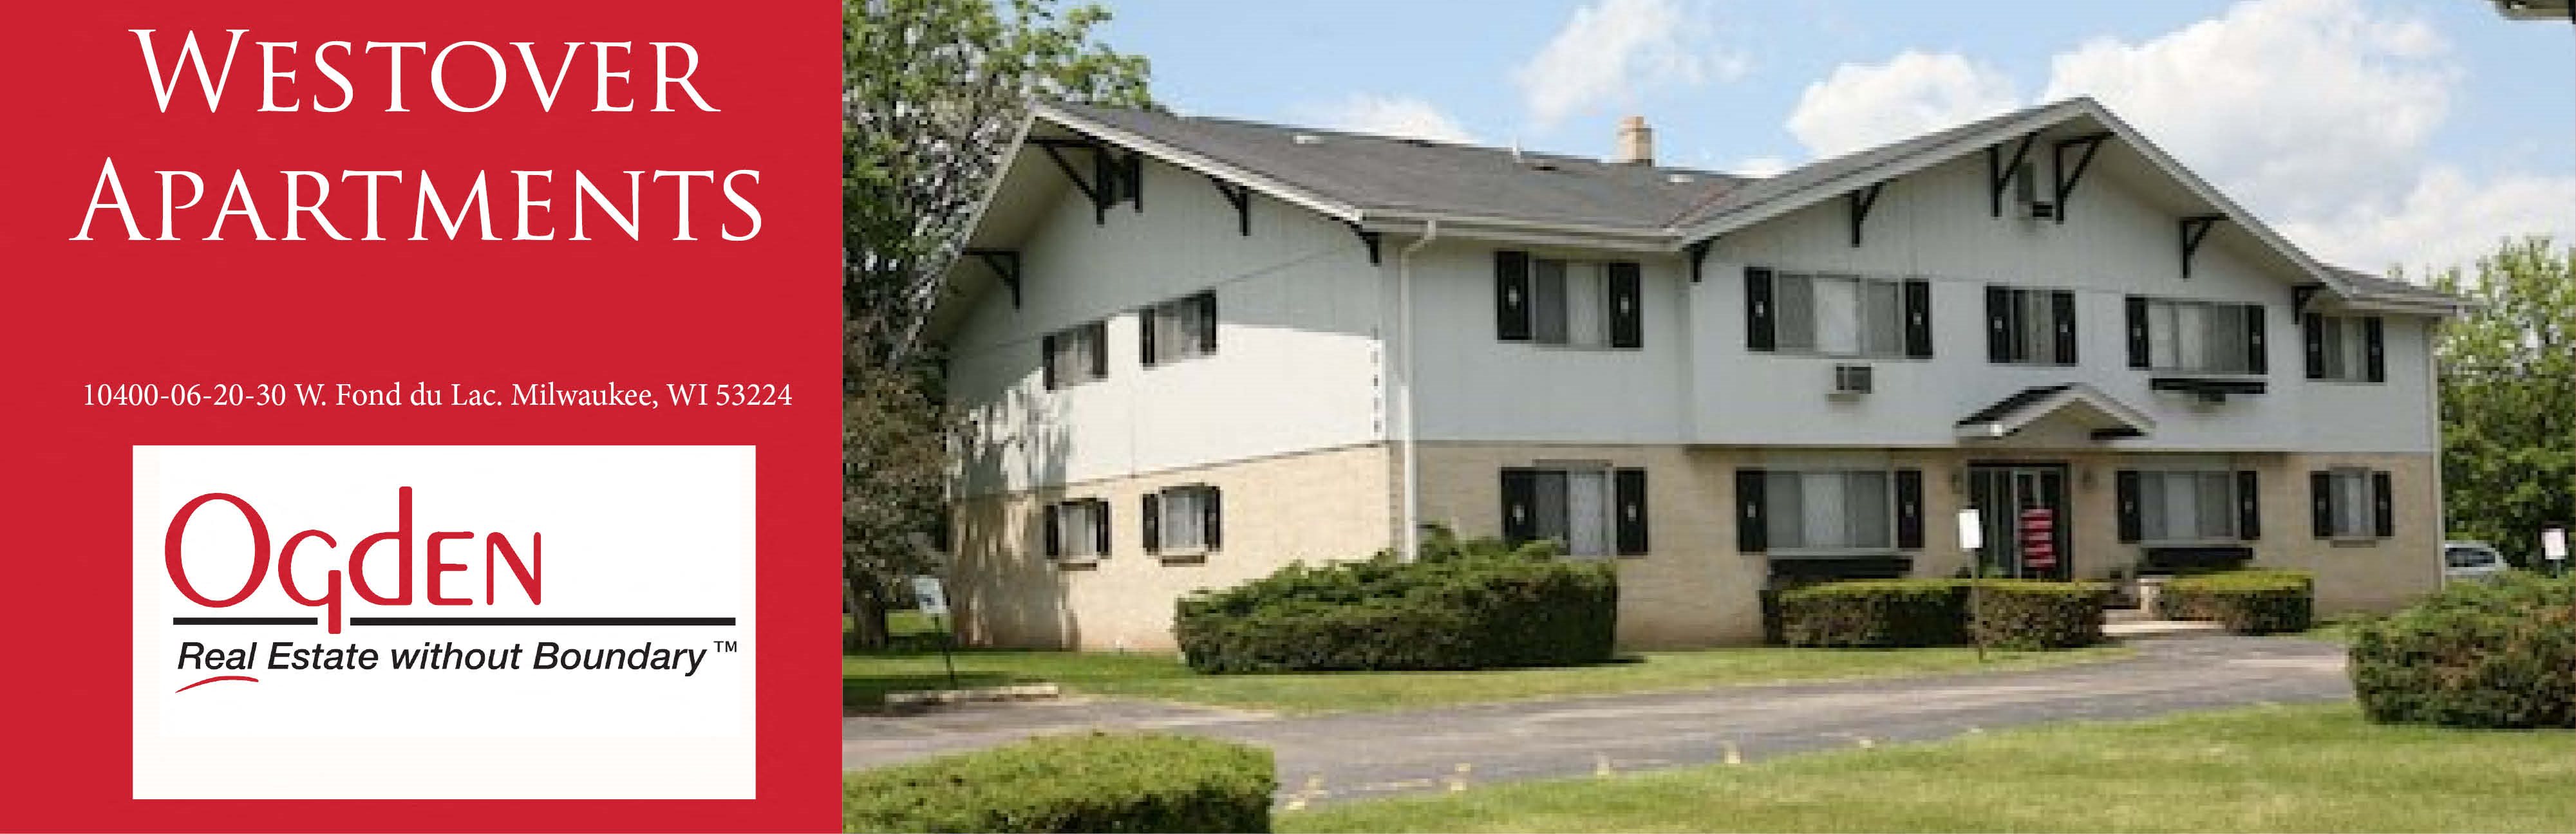 Westover Apartments